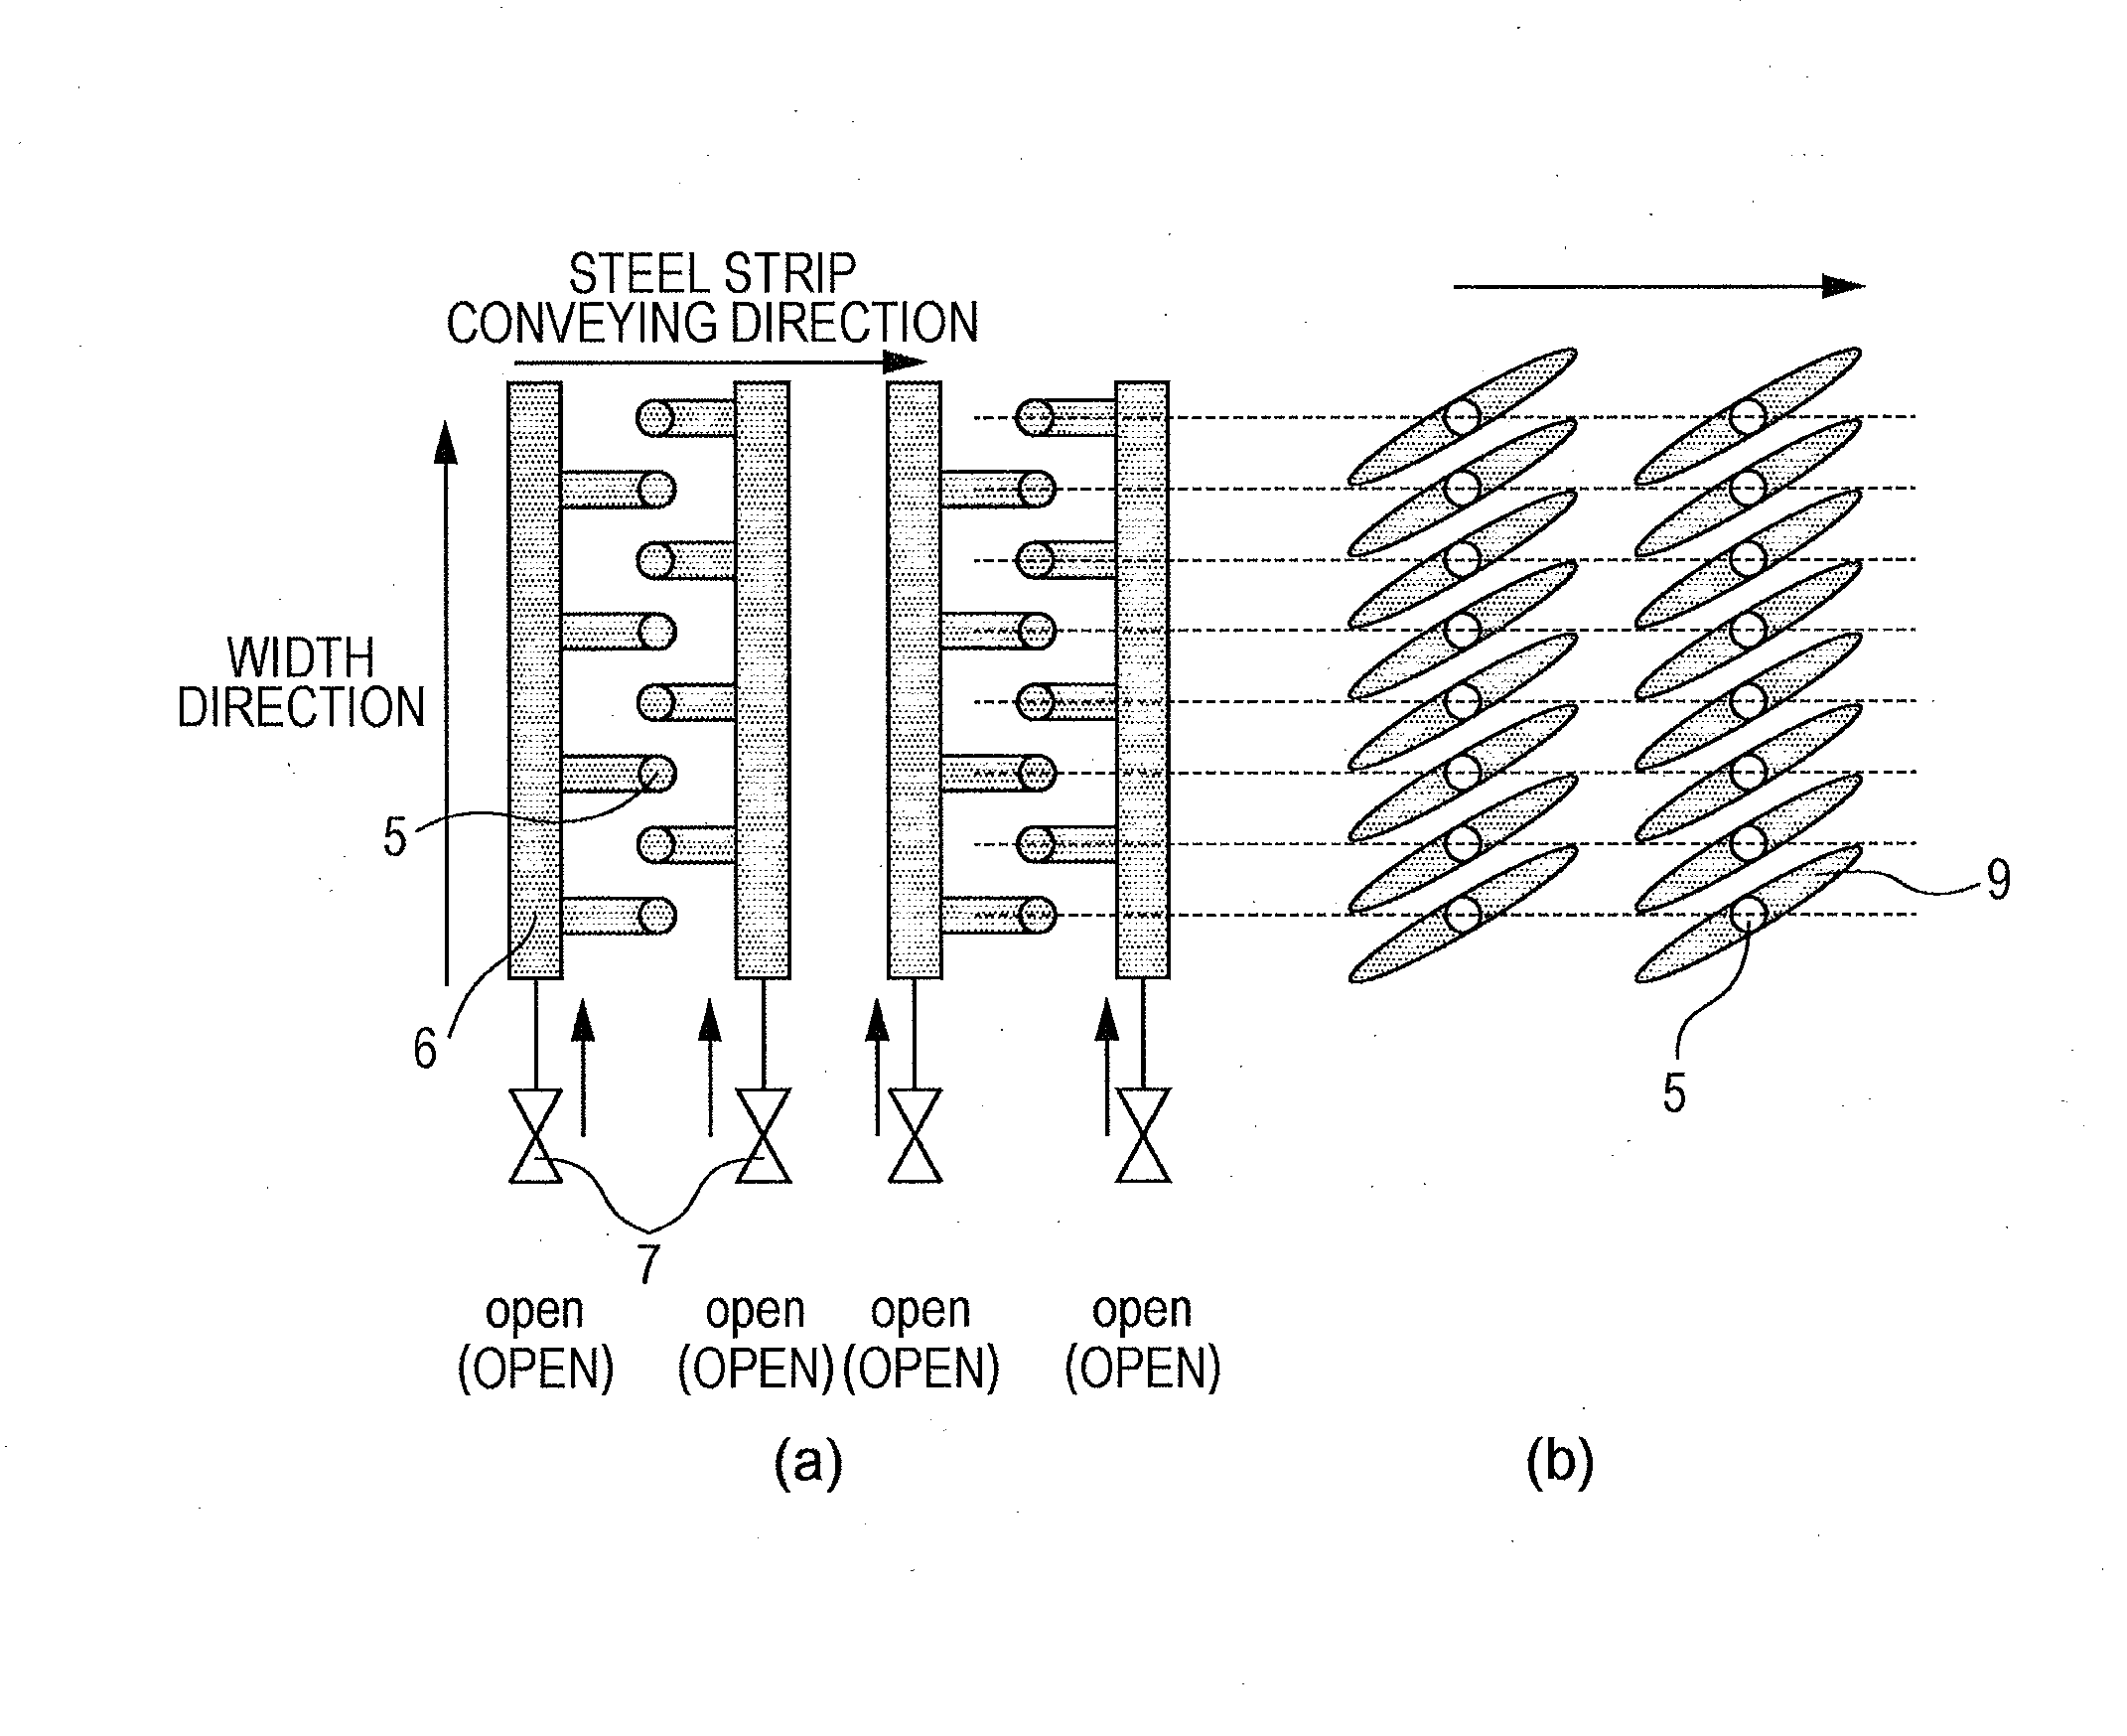 Method and apparatus for cooling hot-rolled steel strip (as amended)